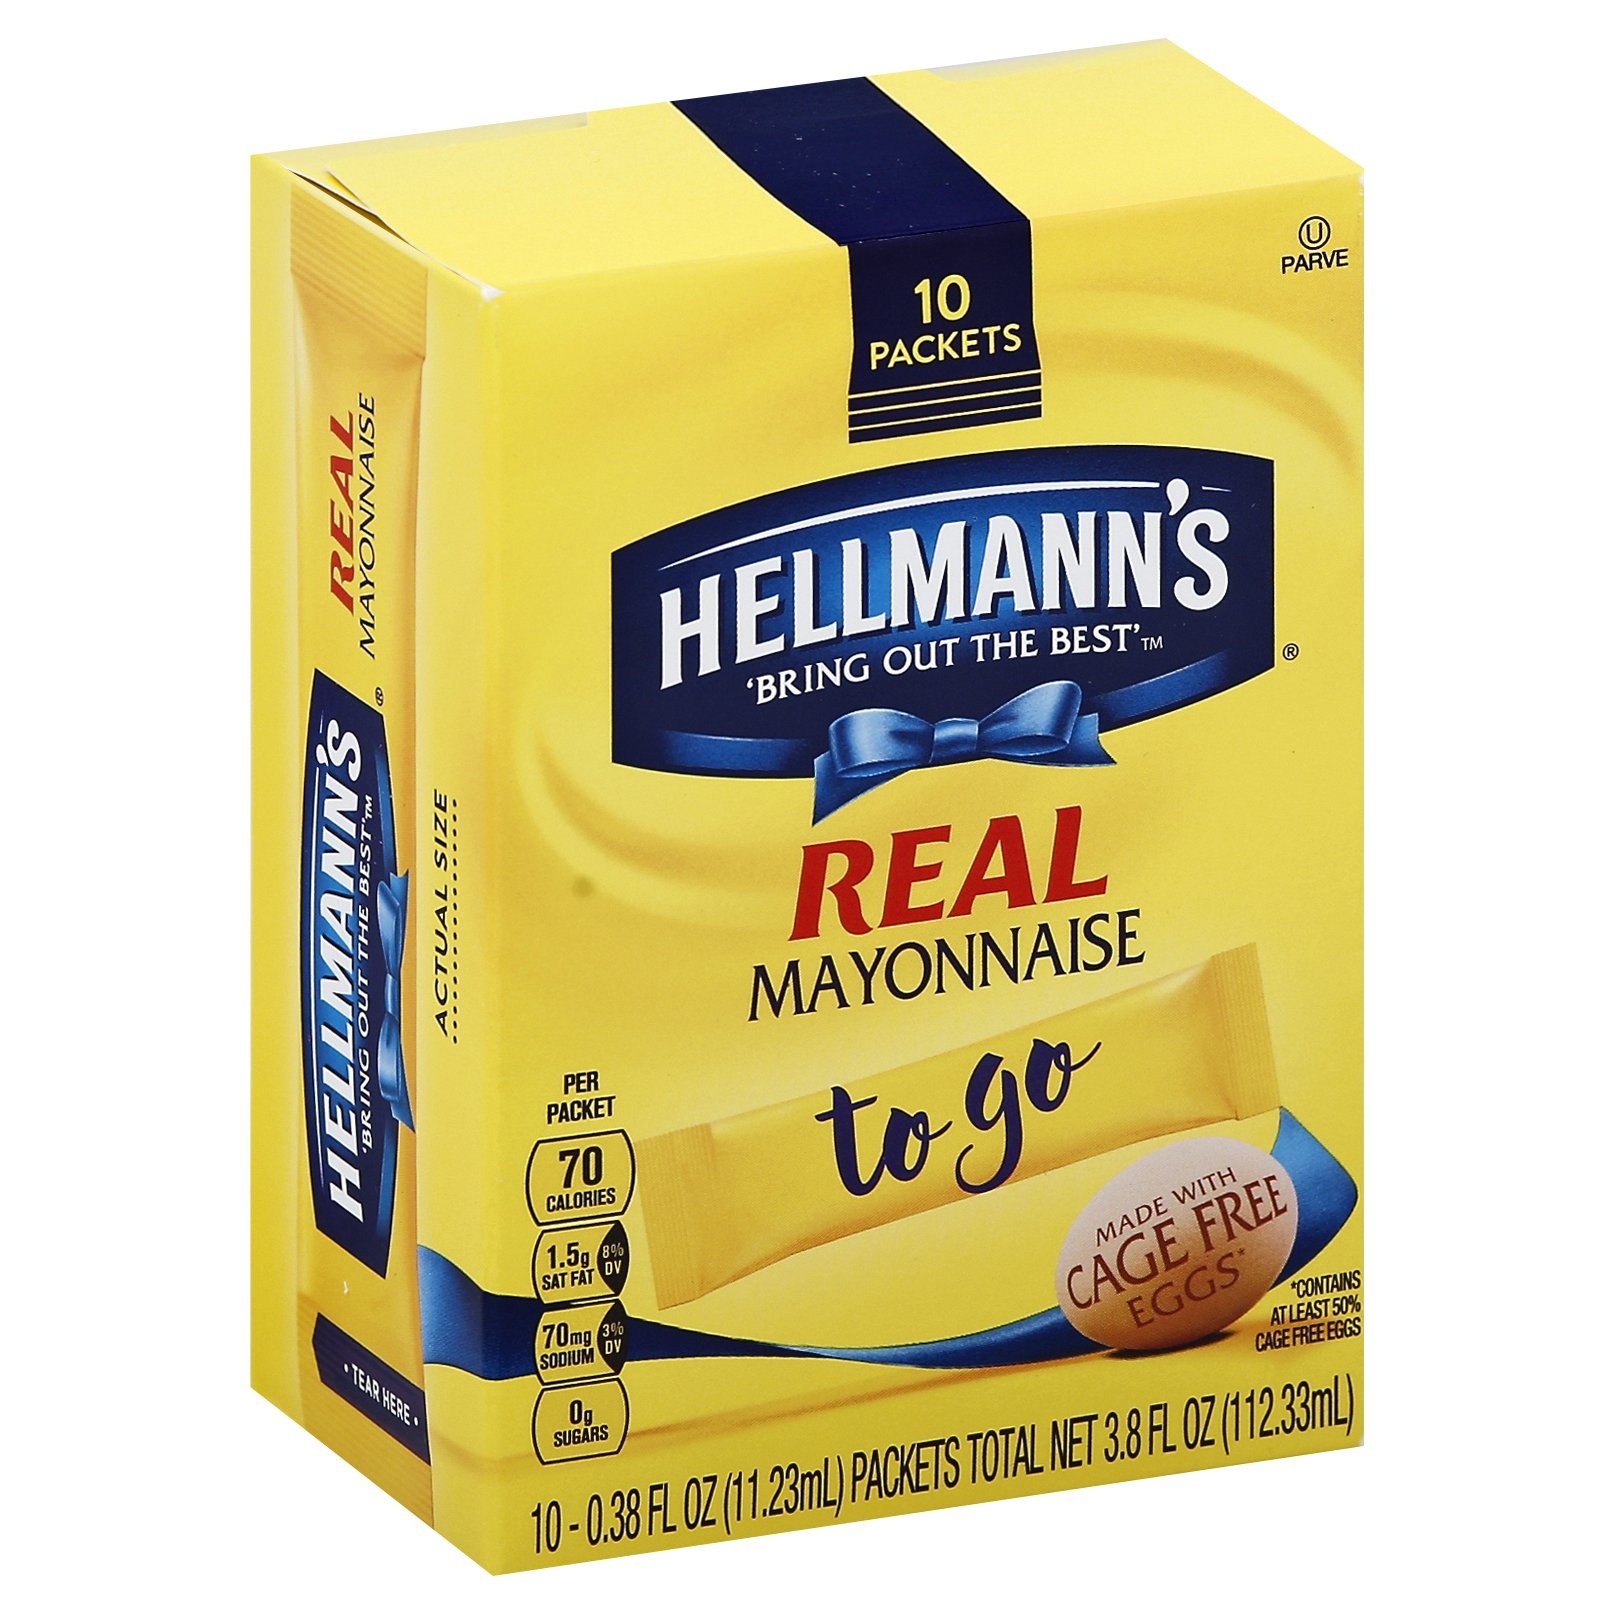 slide 1 of 2, Hellmann's To Go Packets Real Mayonnaise, 10 ct